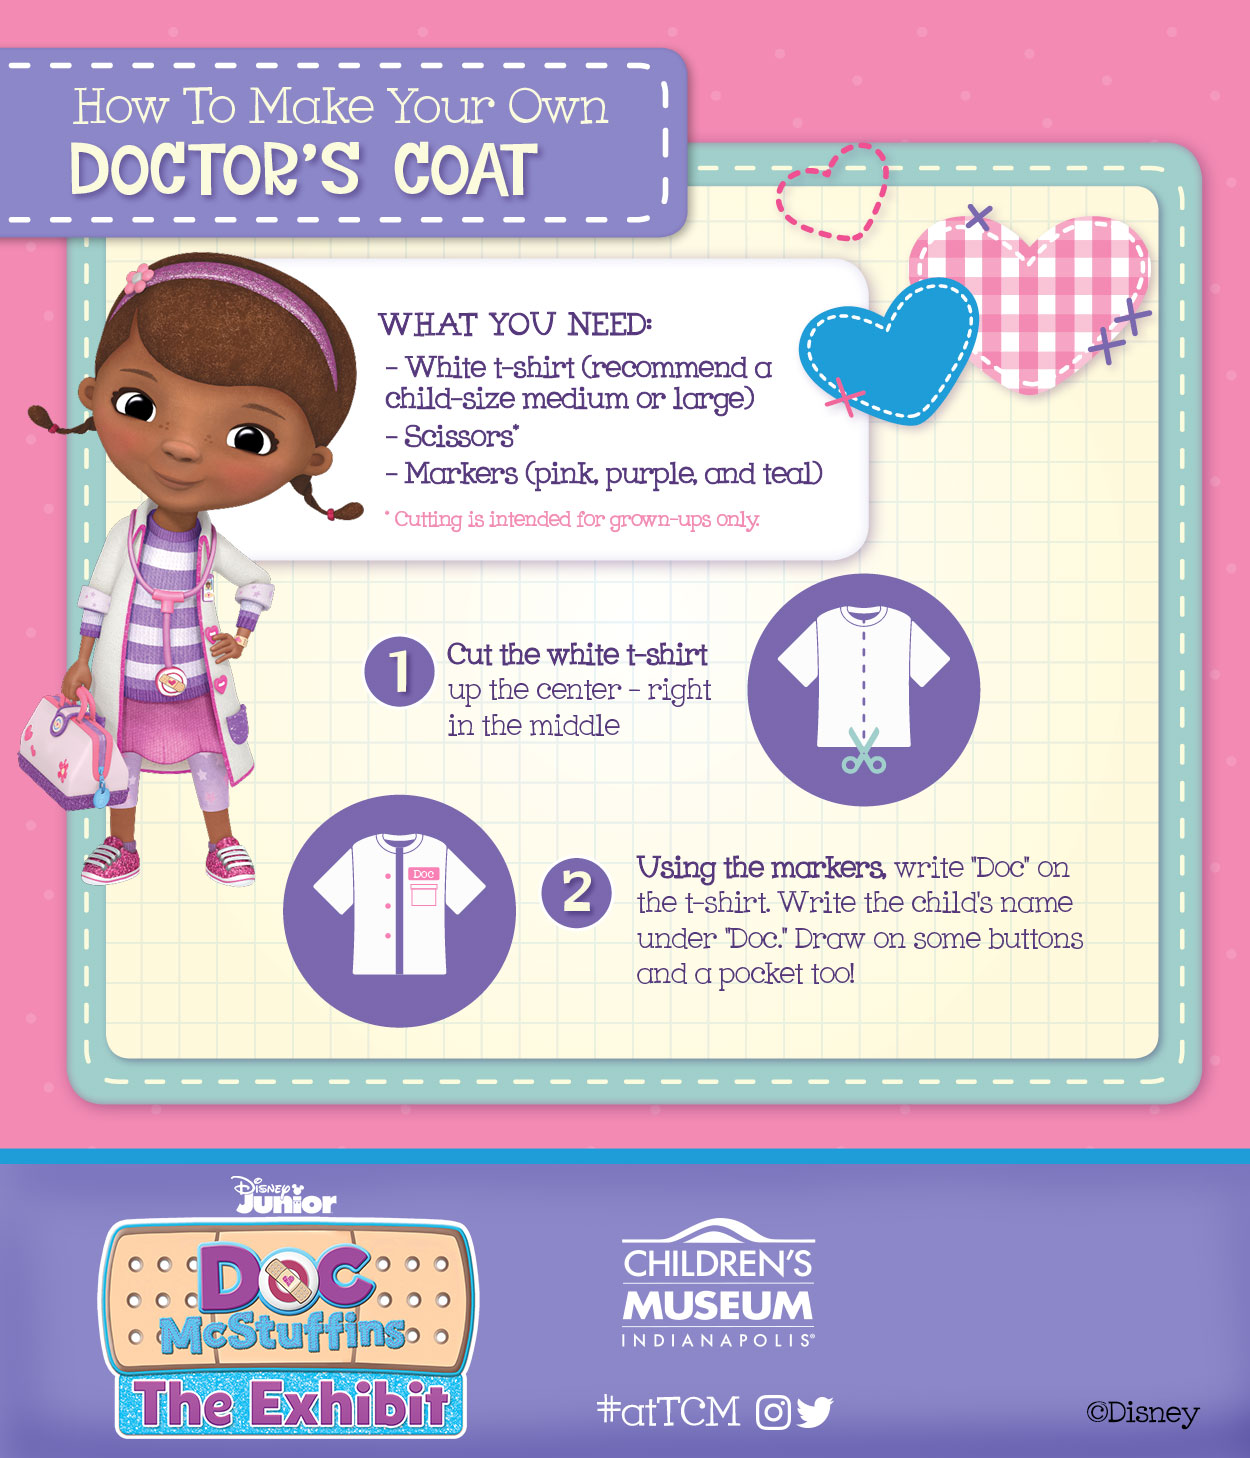 Illustrations of the instructions on how to make your own doctor's coat